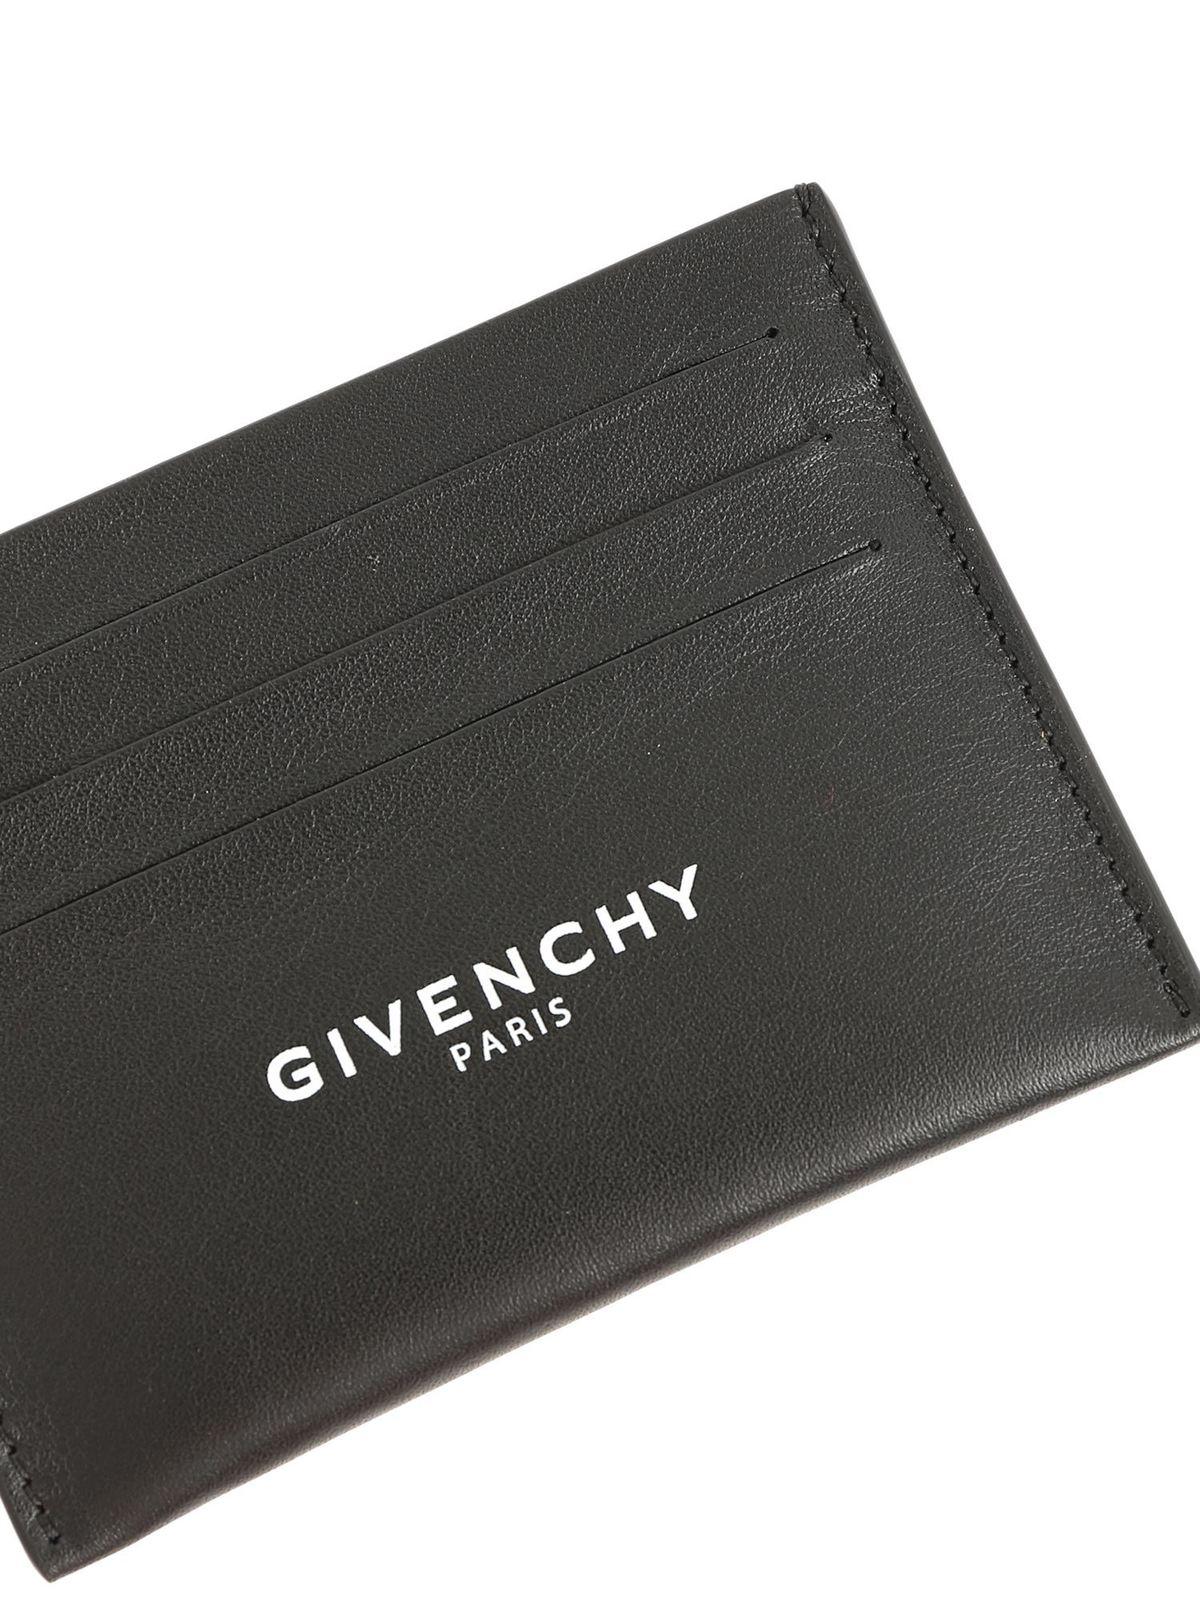 Givenchy Leather Black Card Holder With White Logo Print for Men - Lyst